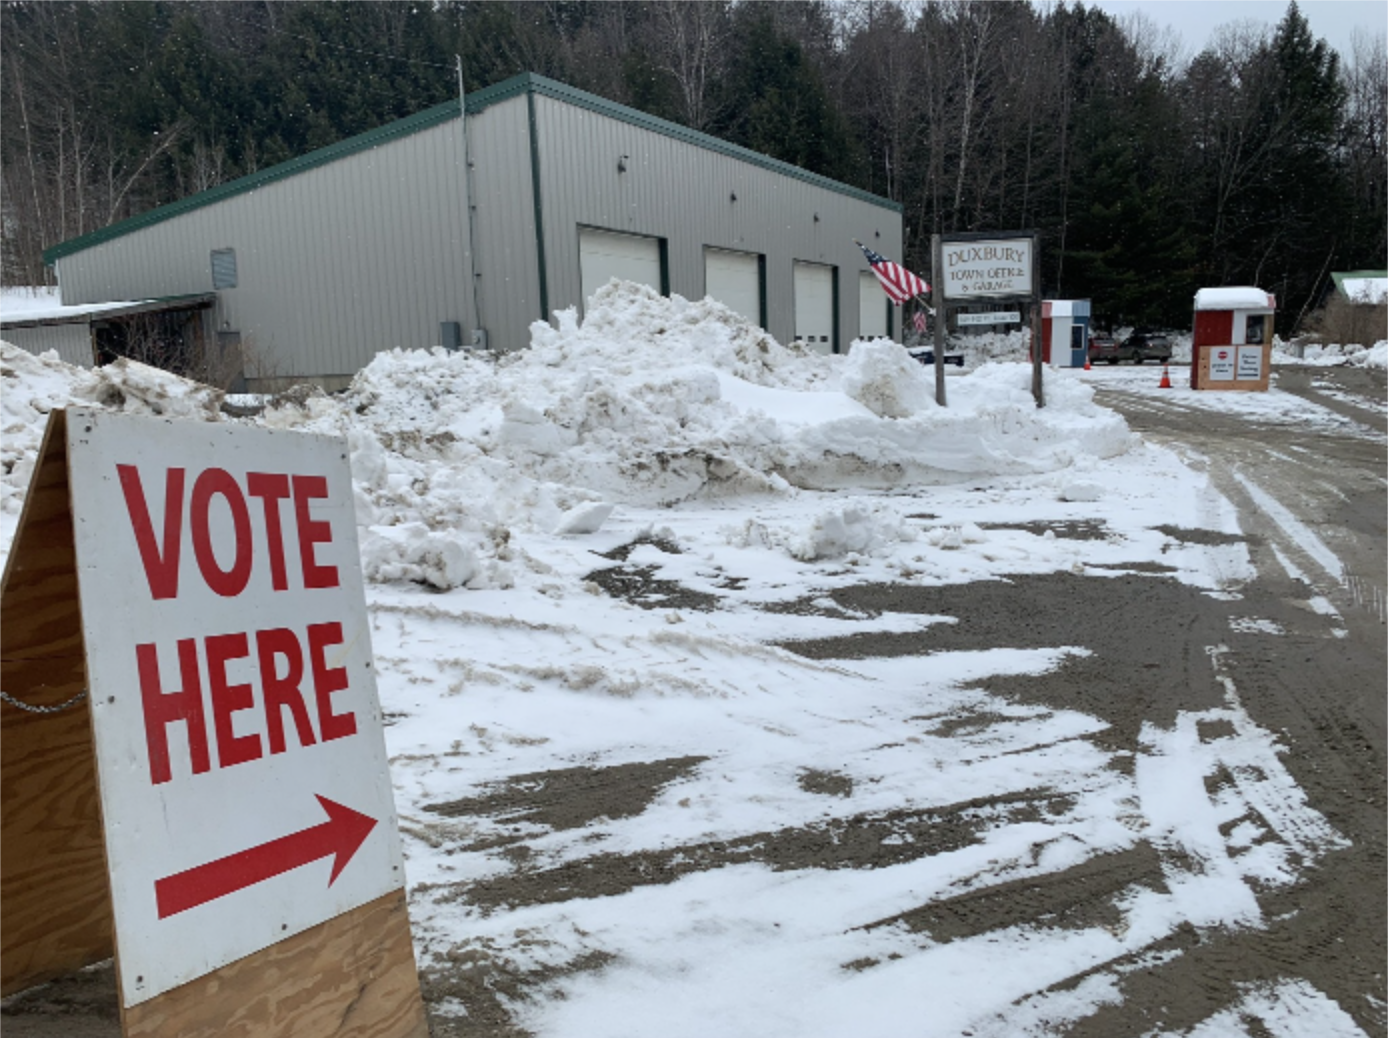  Drive-through voting becomes the main activity outside the Duxbury Town Office and Garage on Town Meeting Day. Photo by Lisa Scagliotti 